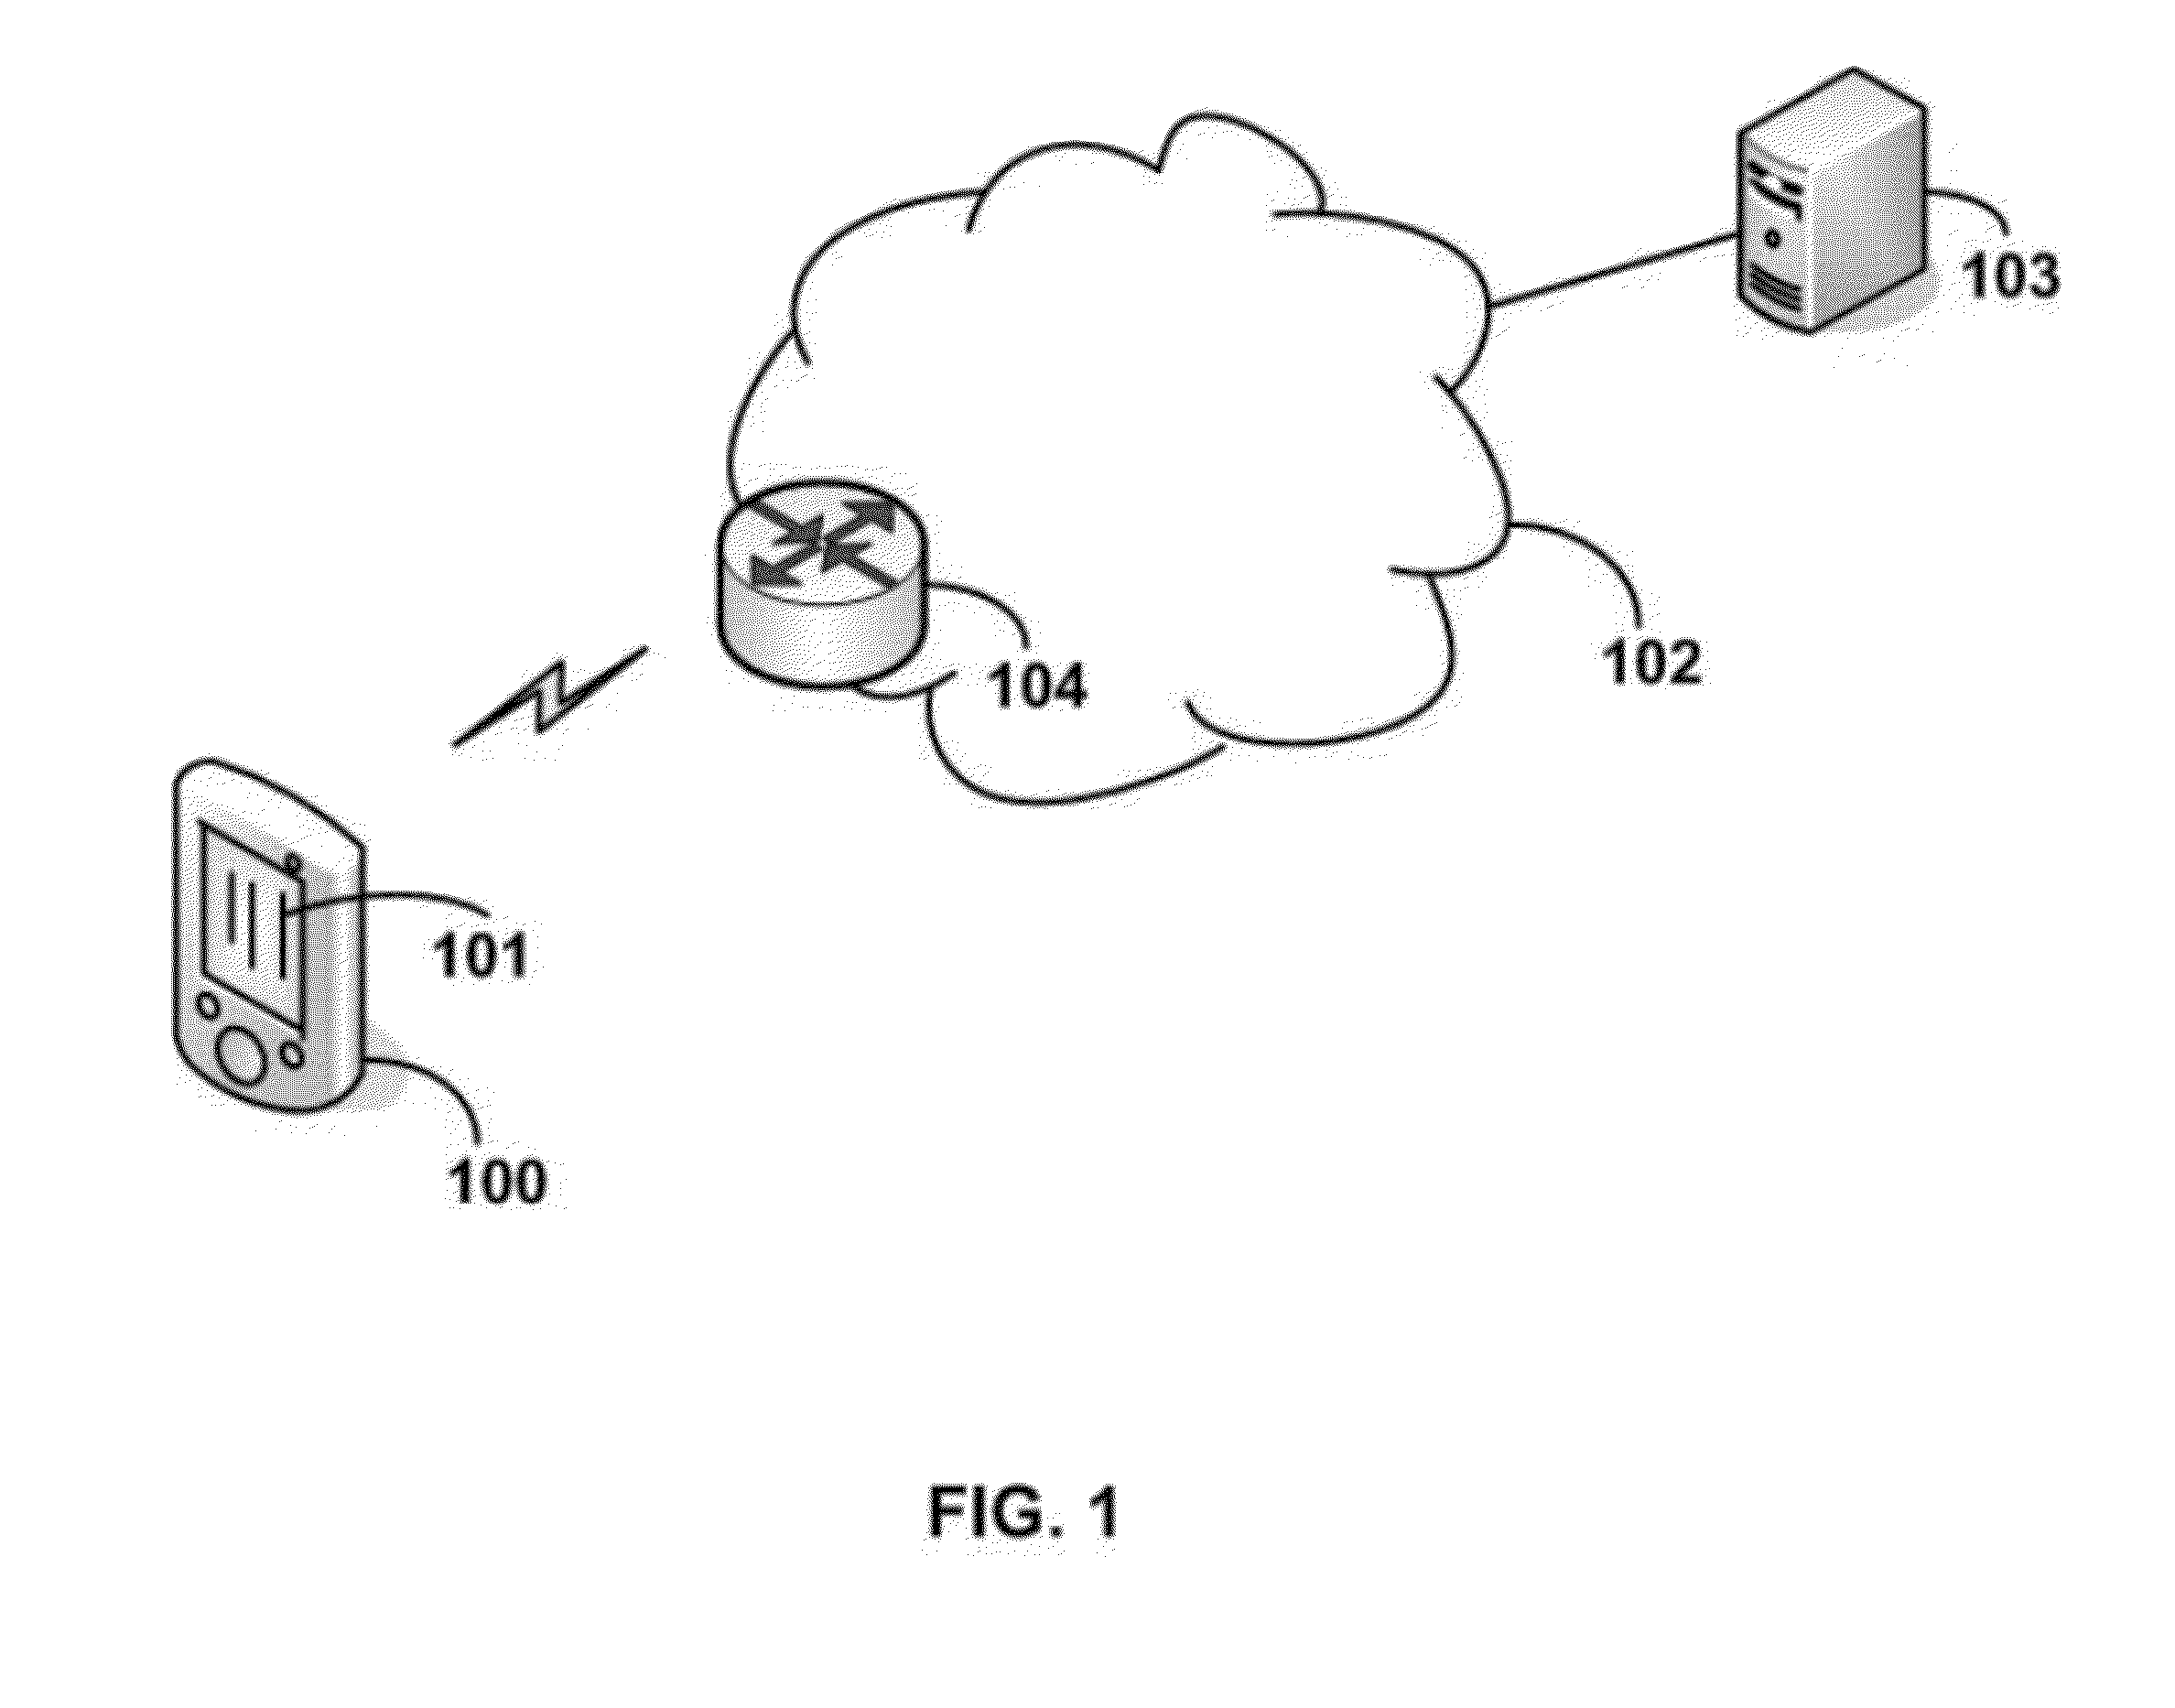 Method and system for locating a product in a store using a mobile device